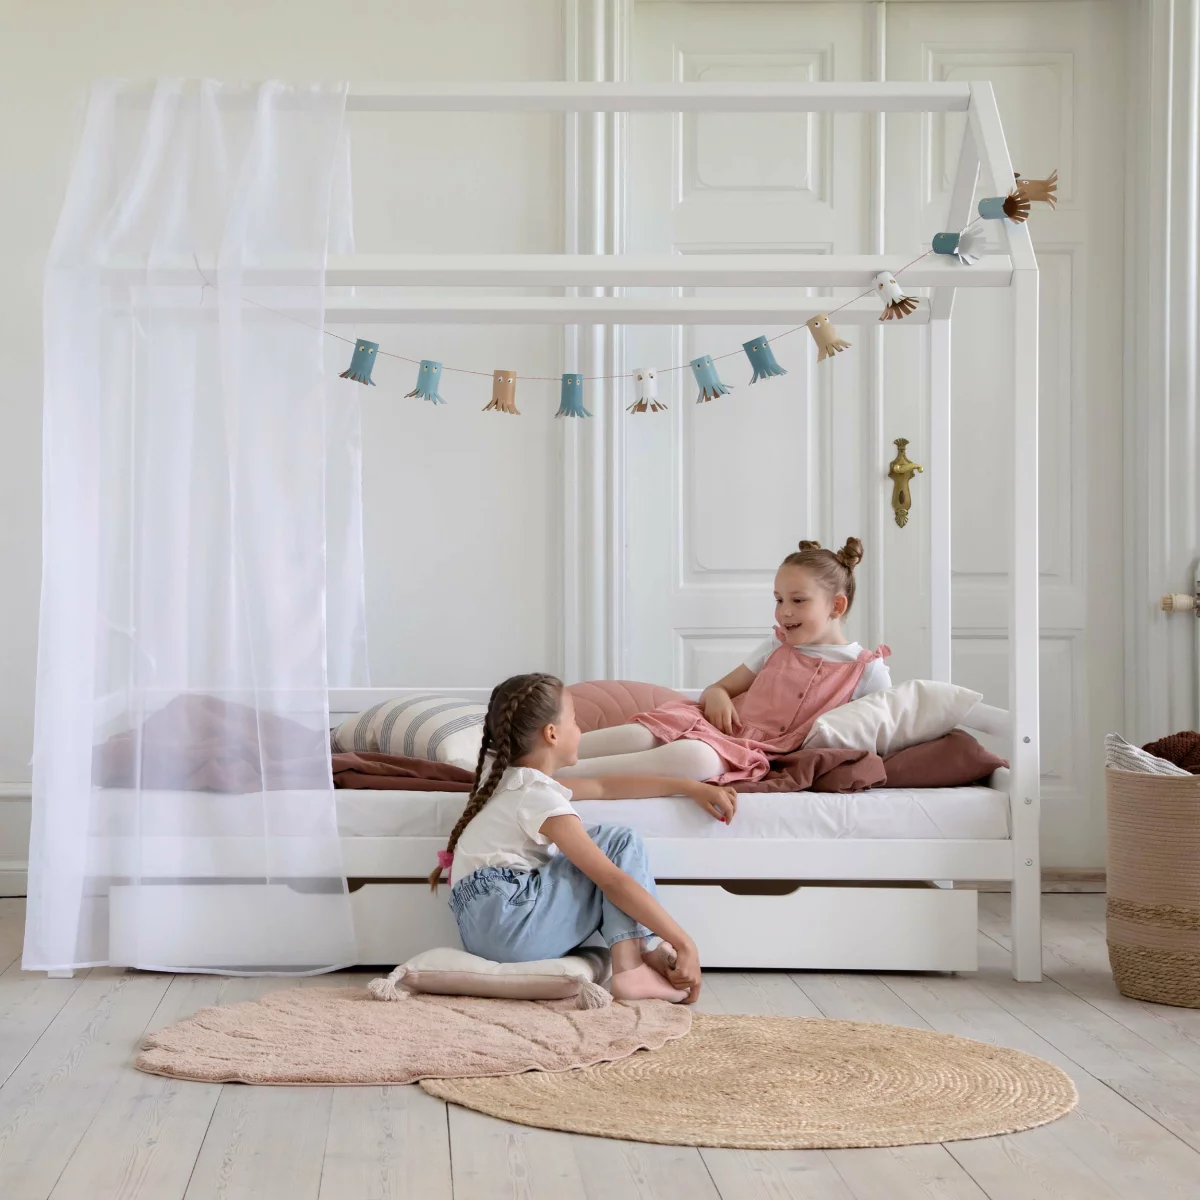 kids-beds-bed-textiles-curtains-for-housebeds-mermaid-textile-for-house-bed-90x200-cm_3.webp